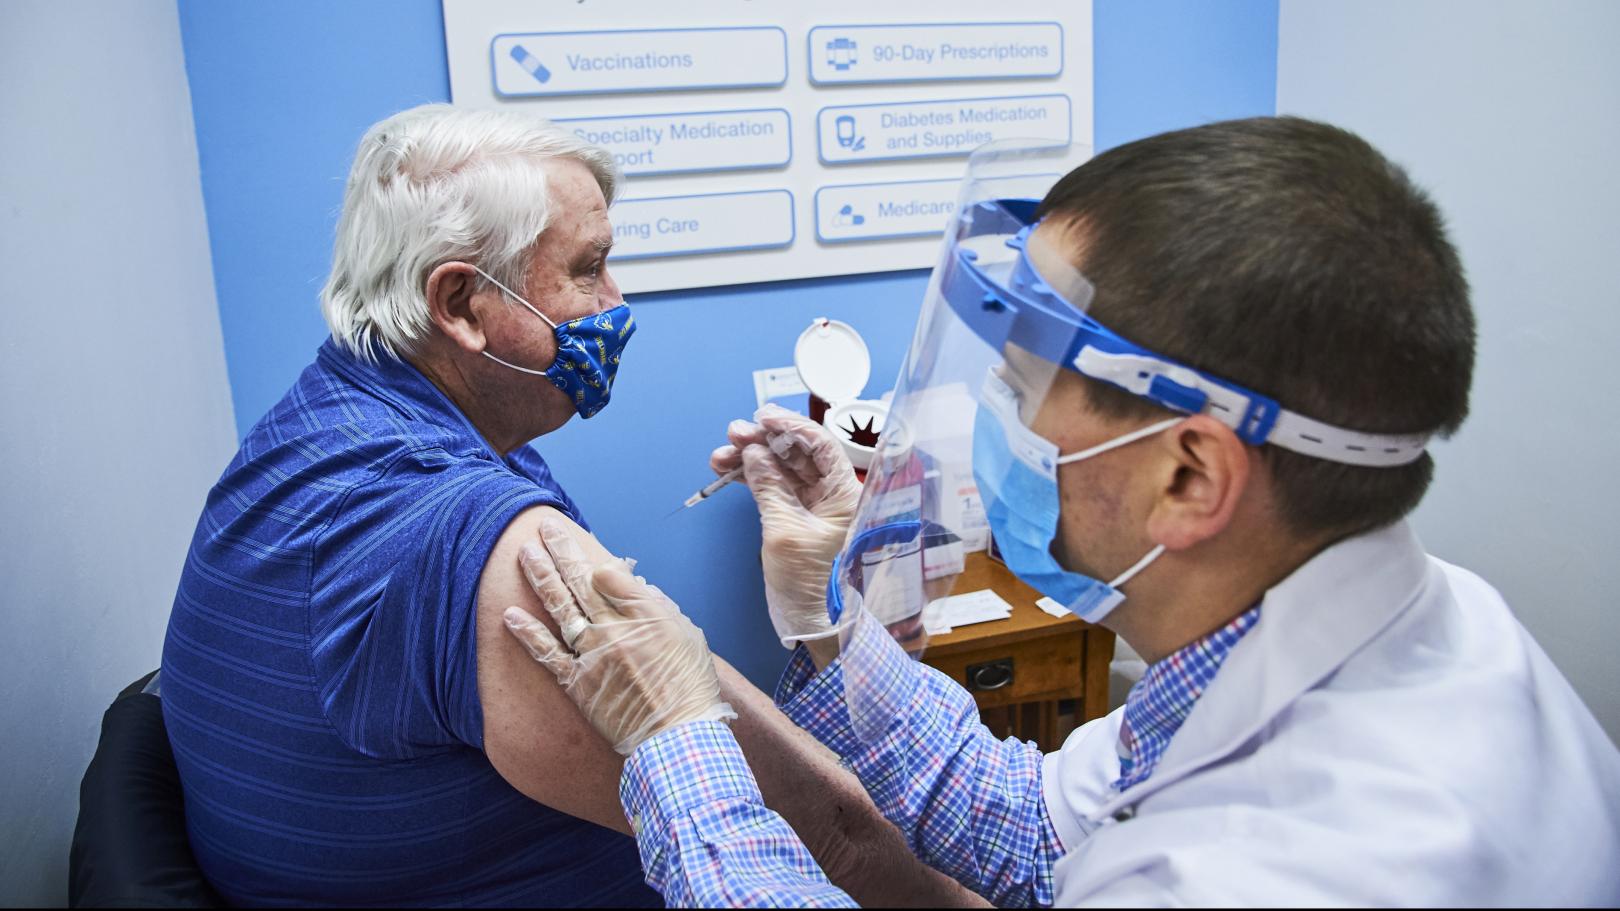 Walgreens team member administering a COVID-19 vaccination.